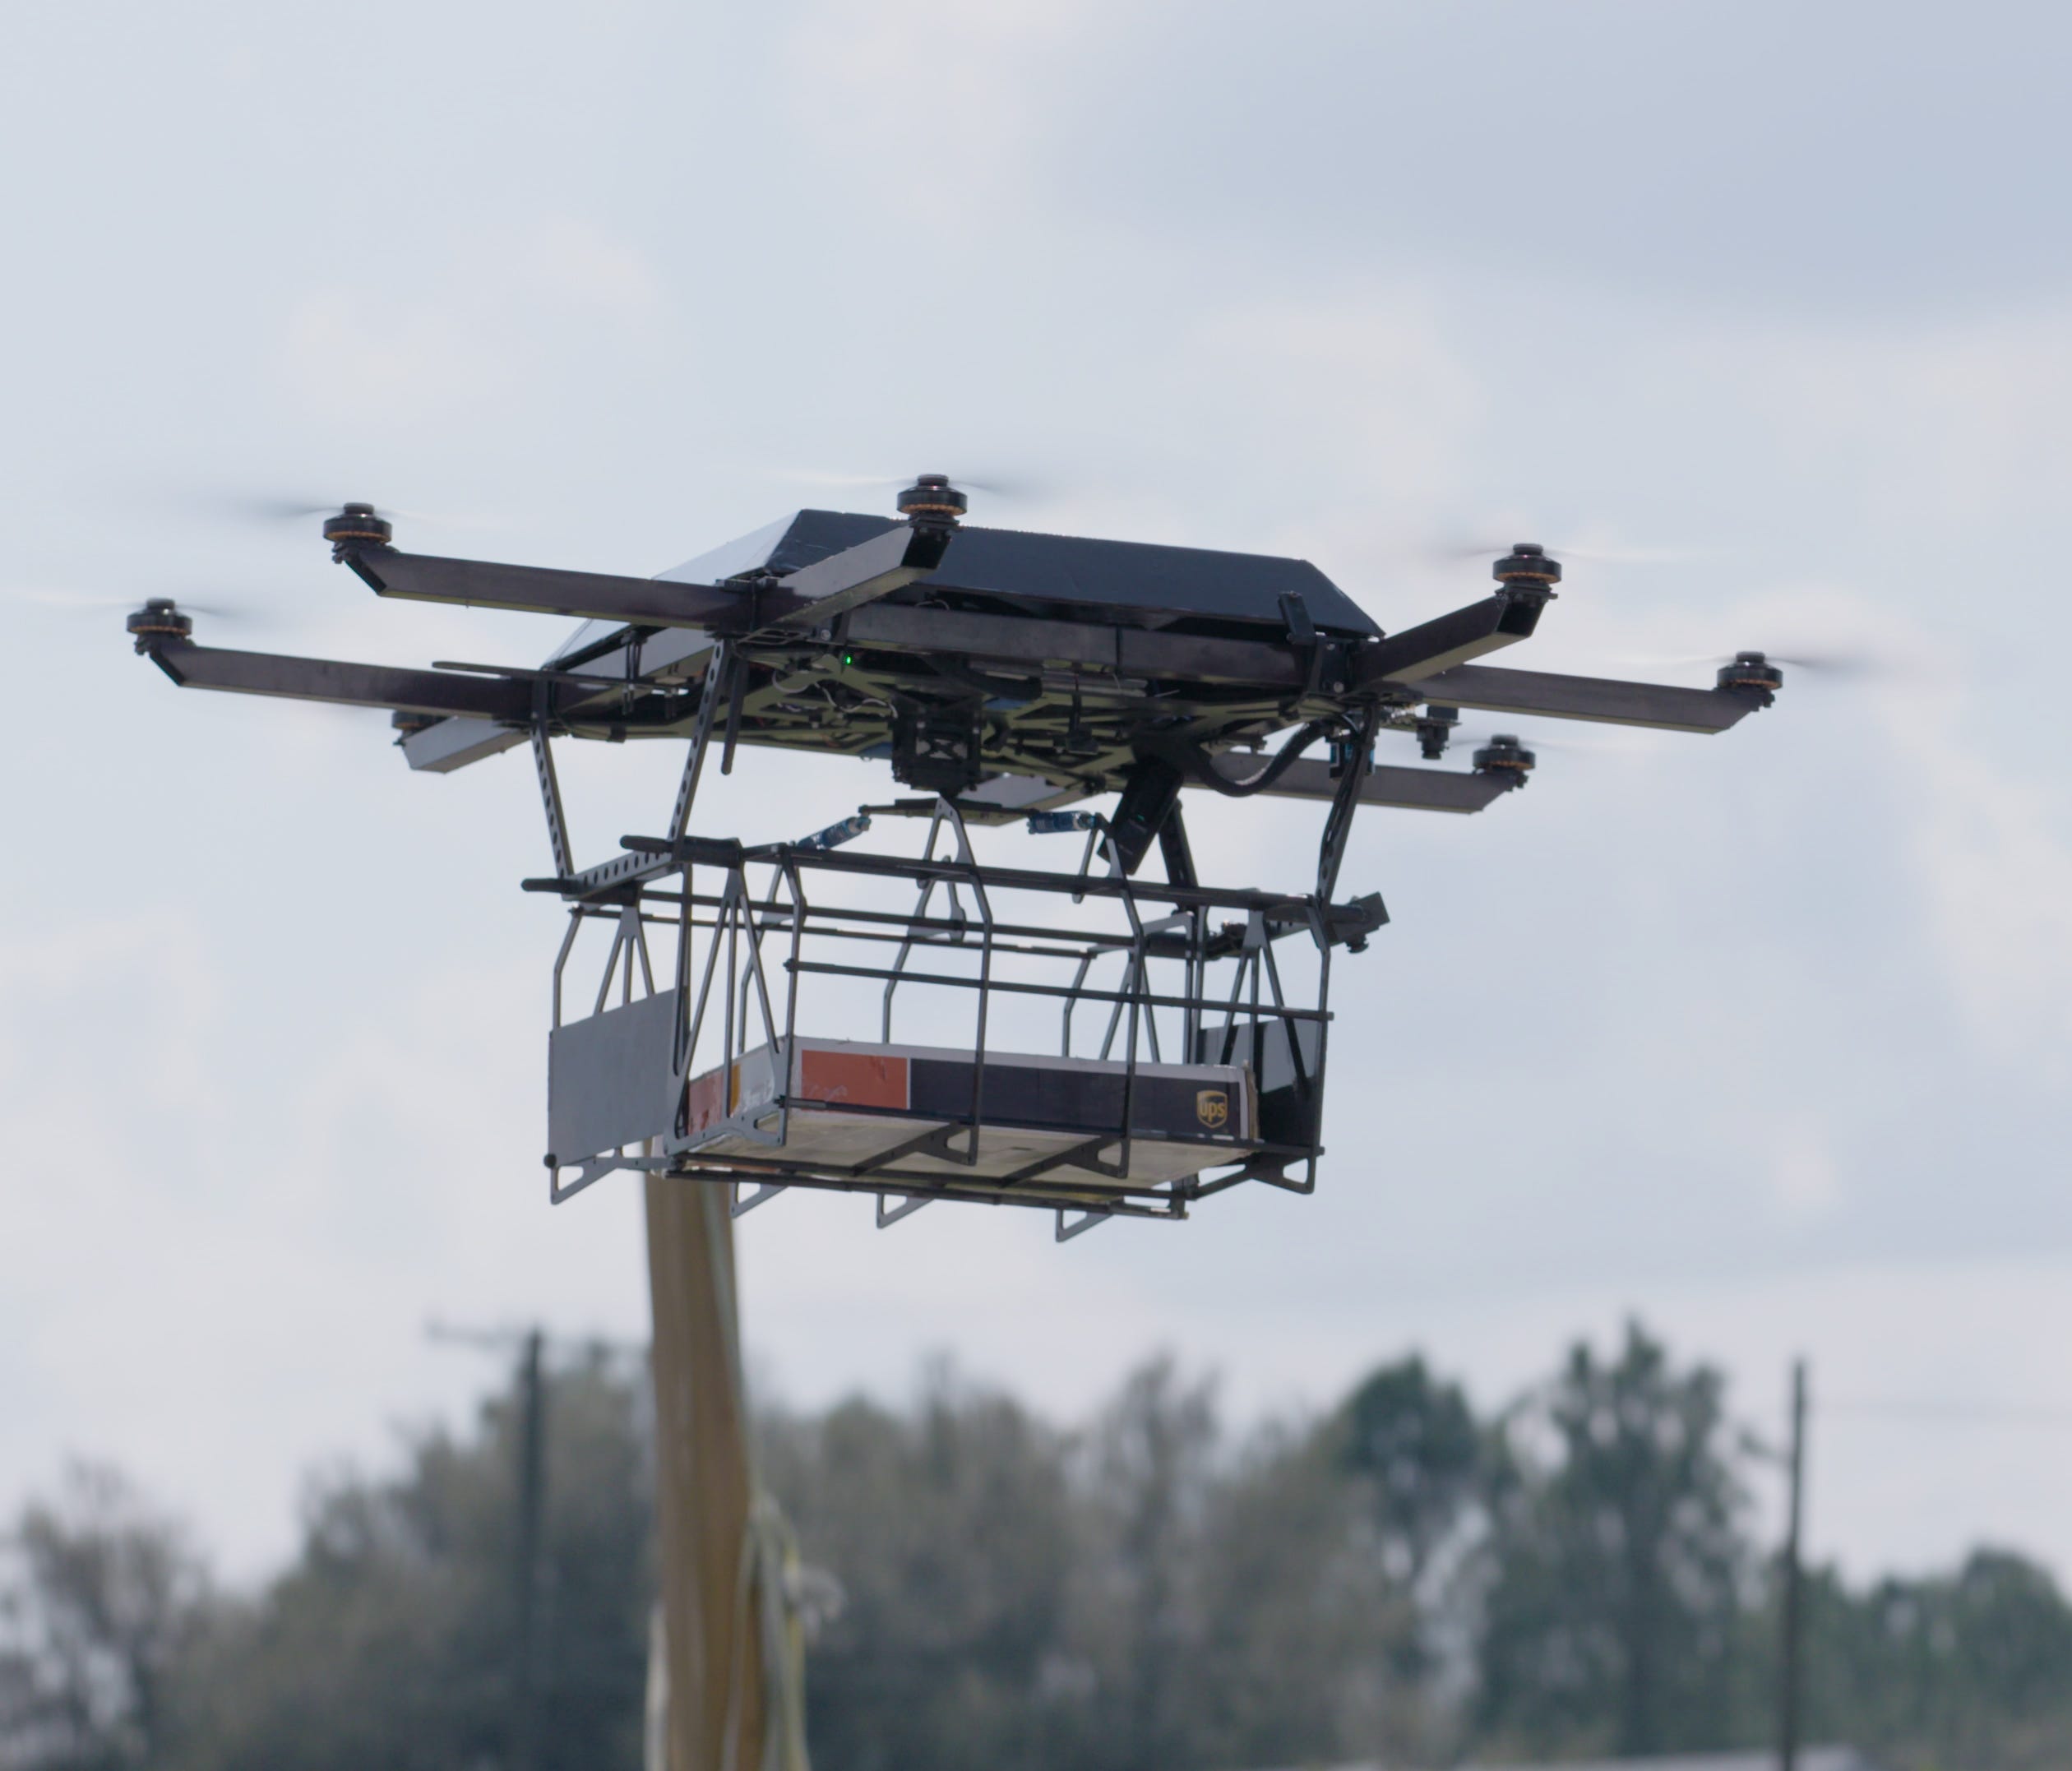 A Work Horse Group drone that docks on top of a UPS van being tested near Lithia, Florida.